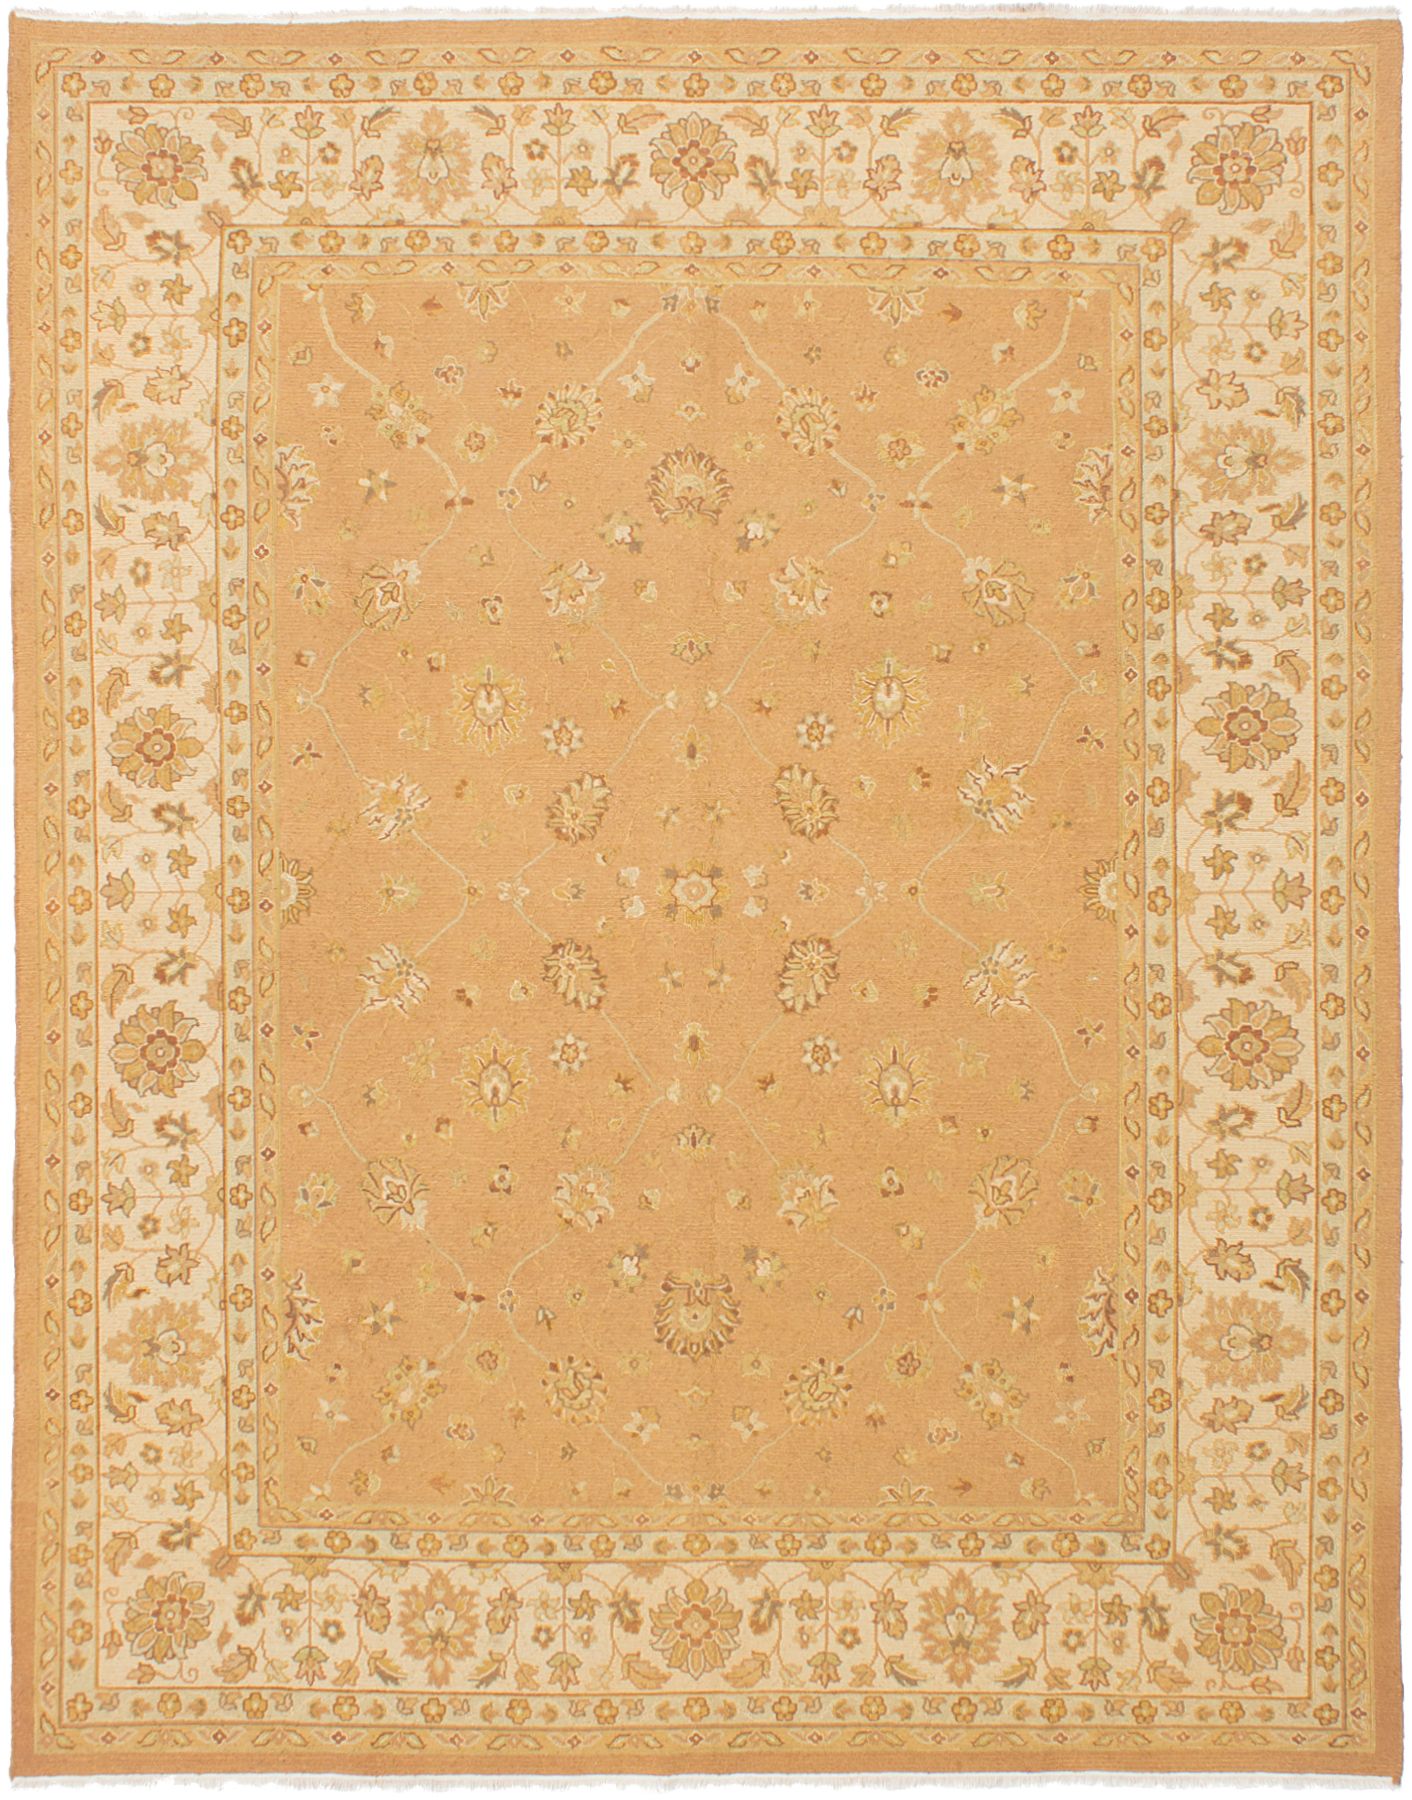 Hand woven Lahor Finest Tan Wool Tapestry Kilim 7'9" x 9'9"  Size: 7'9" x 9'9"  